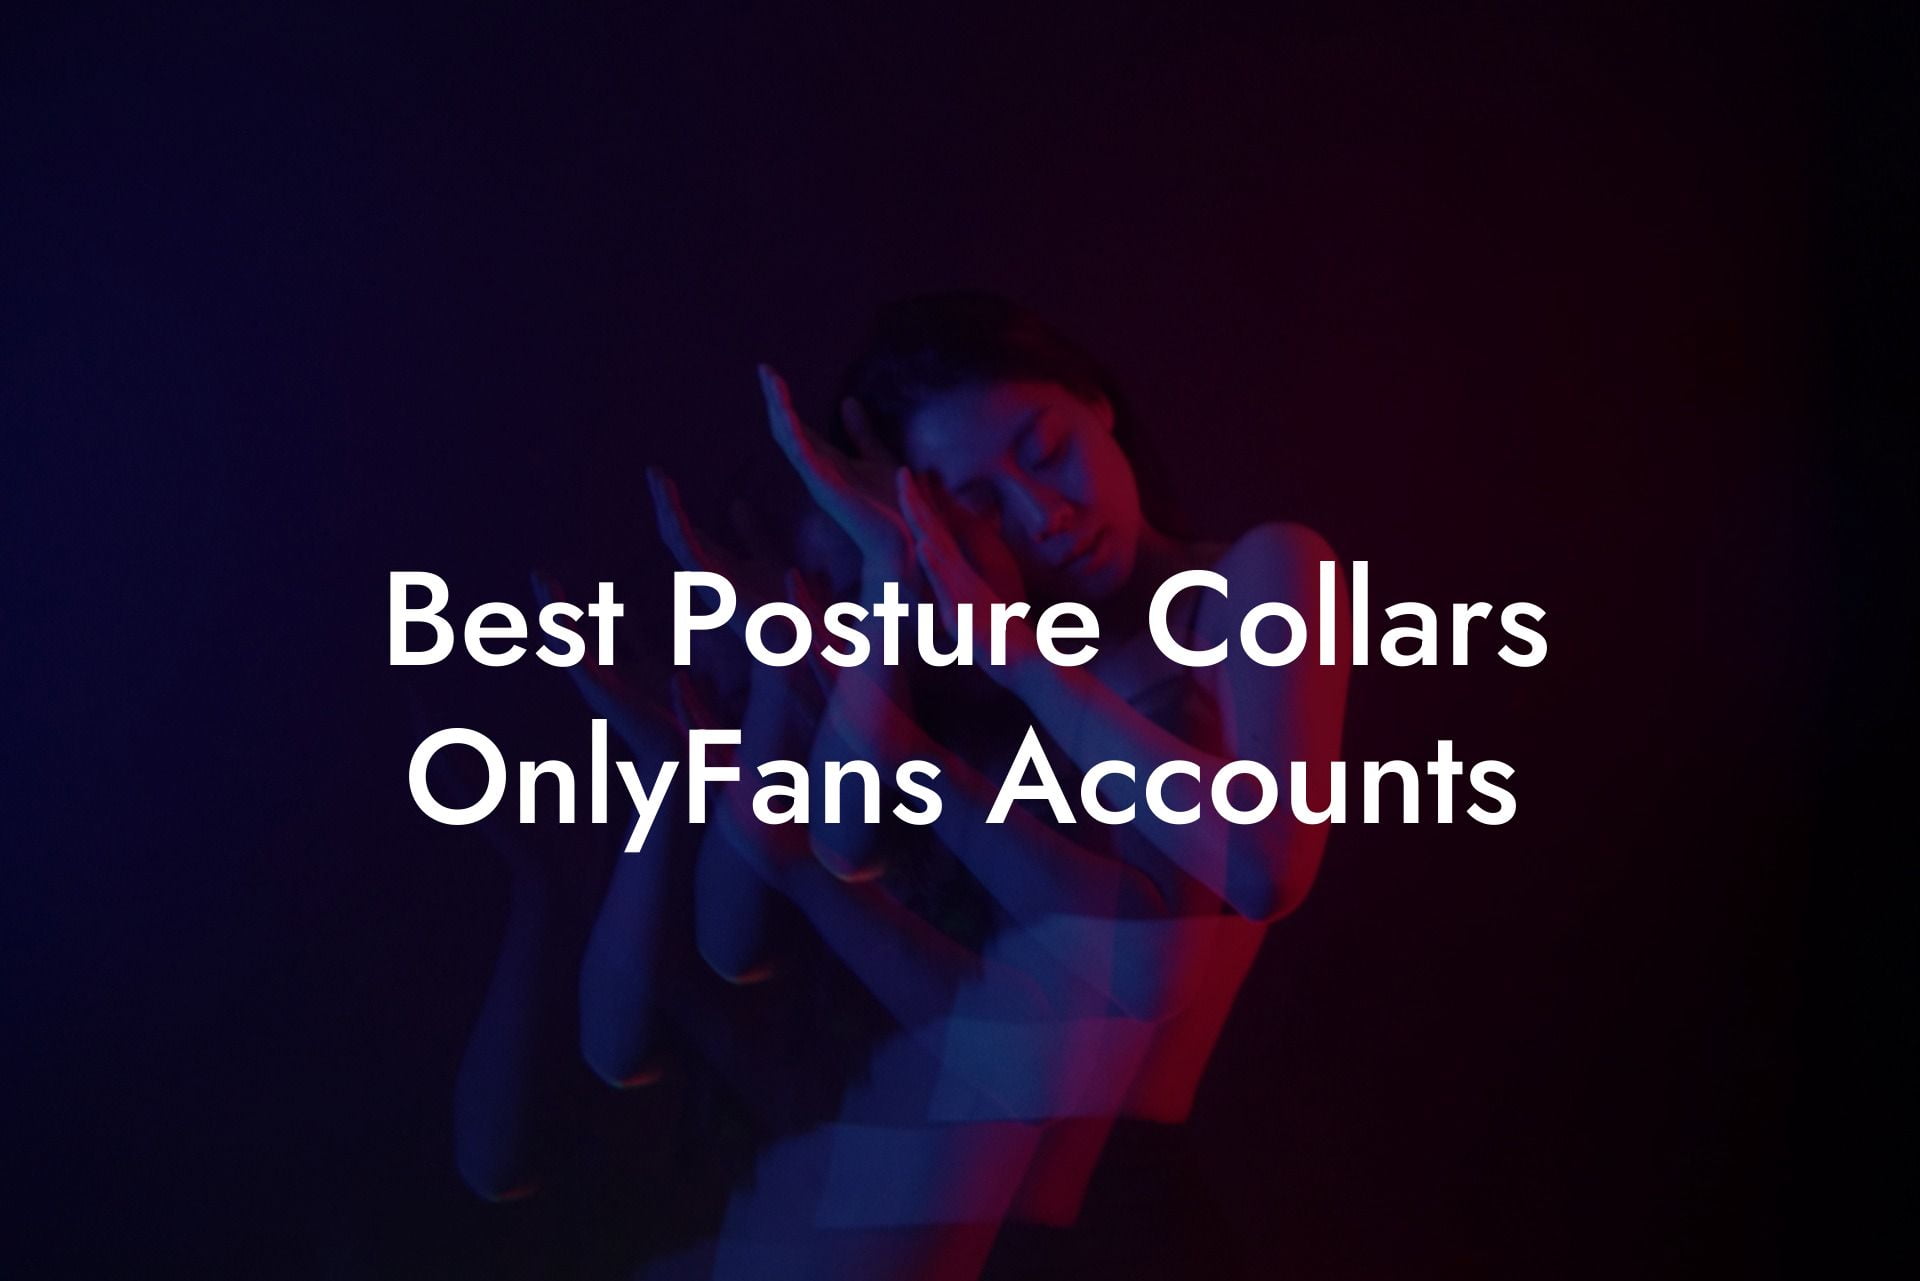 Best Posture Collars OnlyFans Accounts